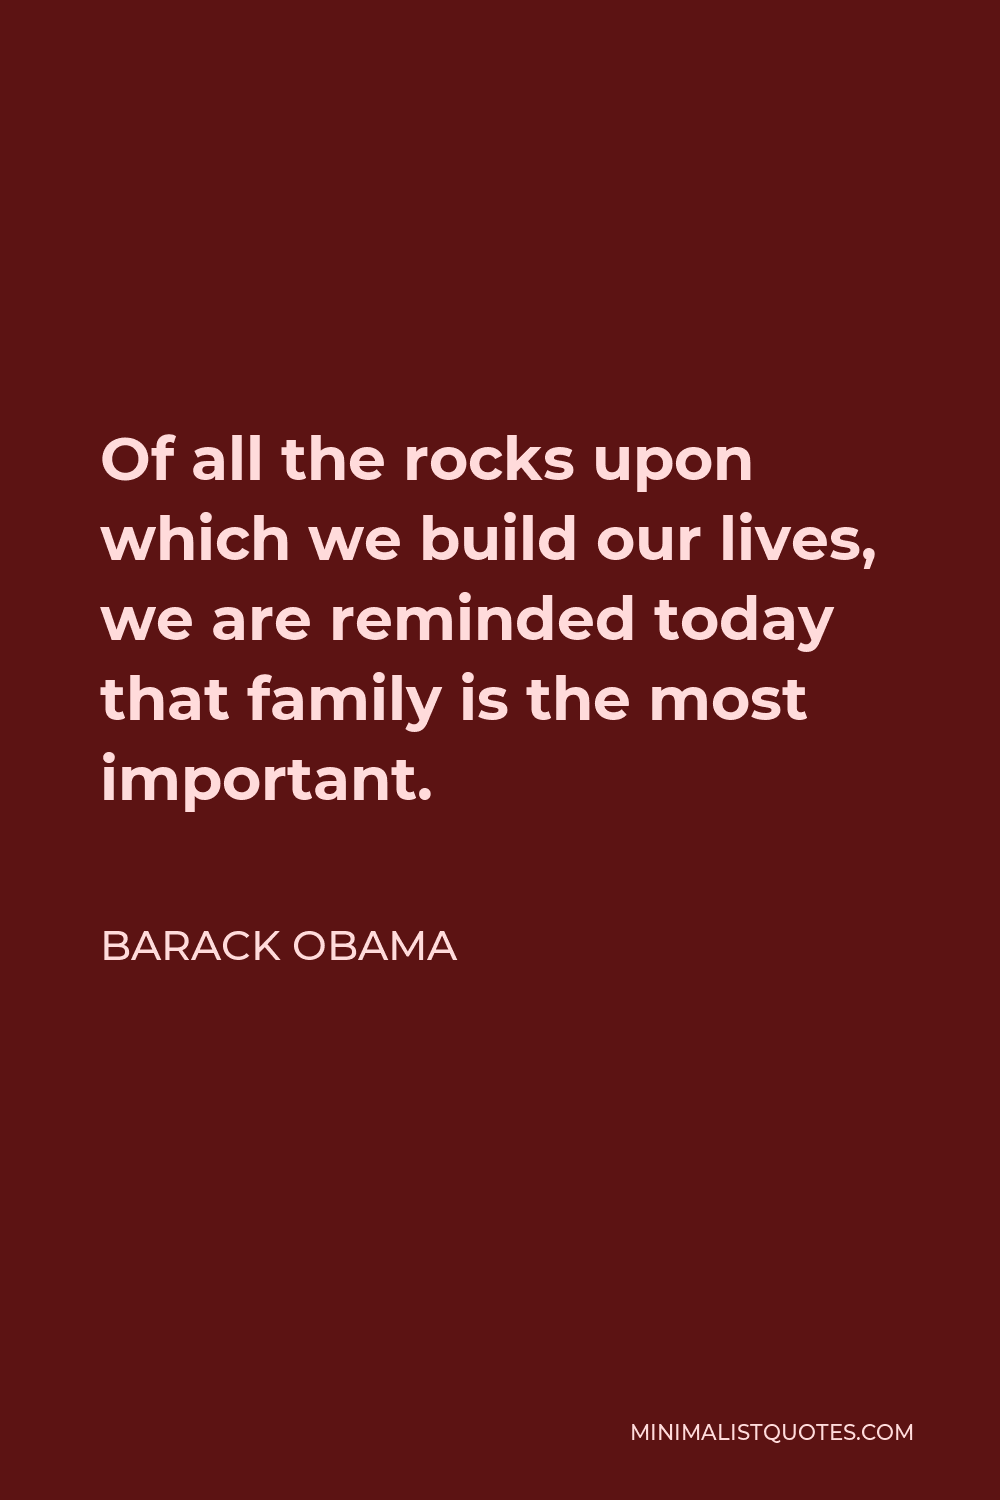 Barack Obama Quote - Of all the rocks upon which we build our lives, we are reminded today that family is the most important.